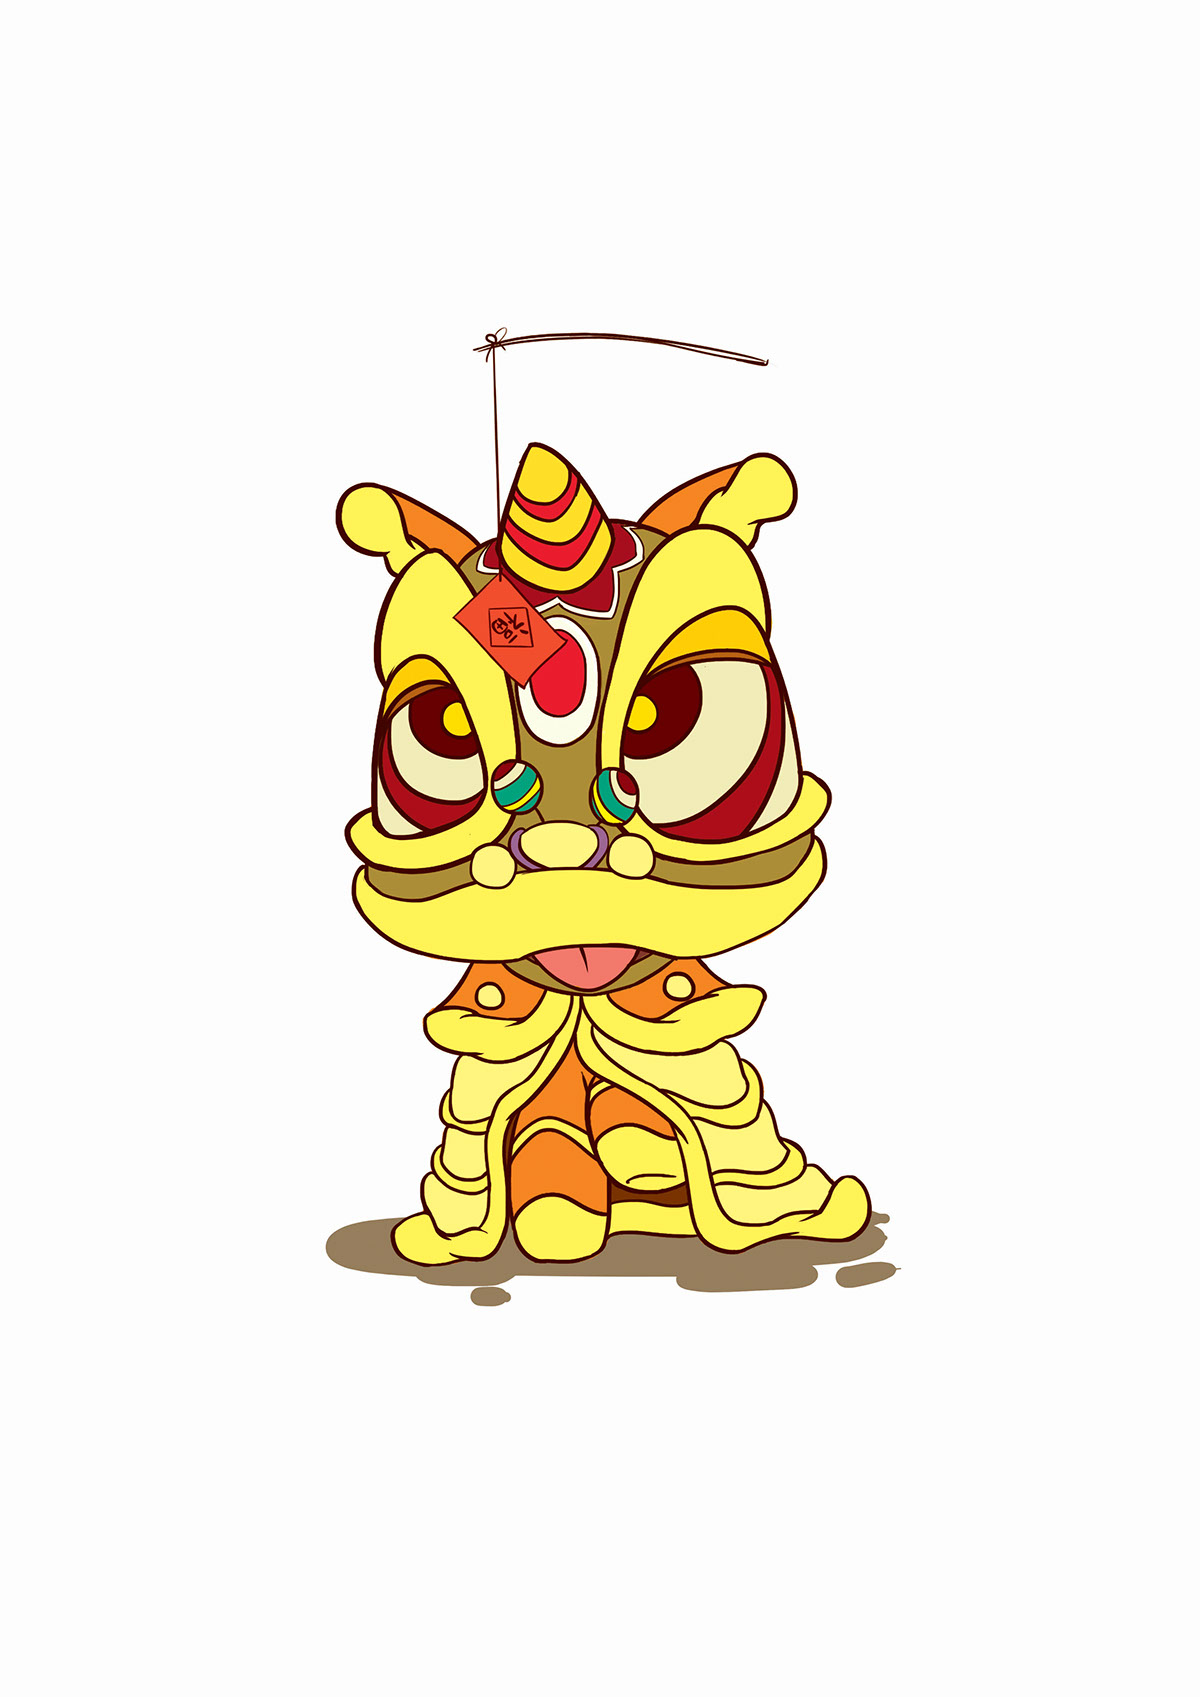 xiao shi lion DANCE   yellow gold color cute happy chinese new year gong xi fa cai ang pao red